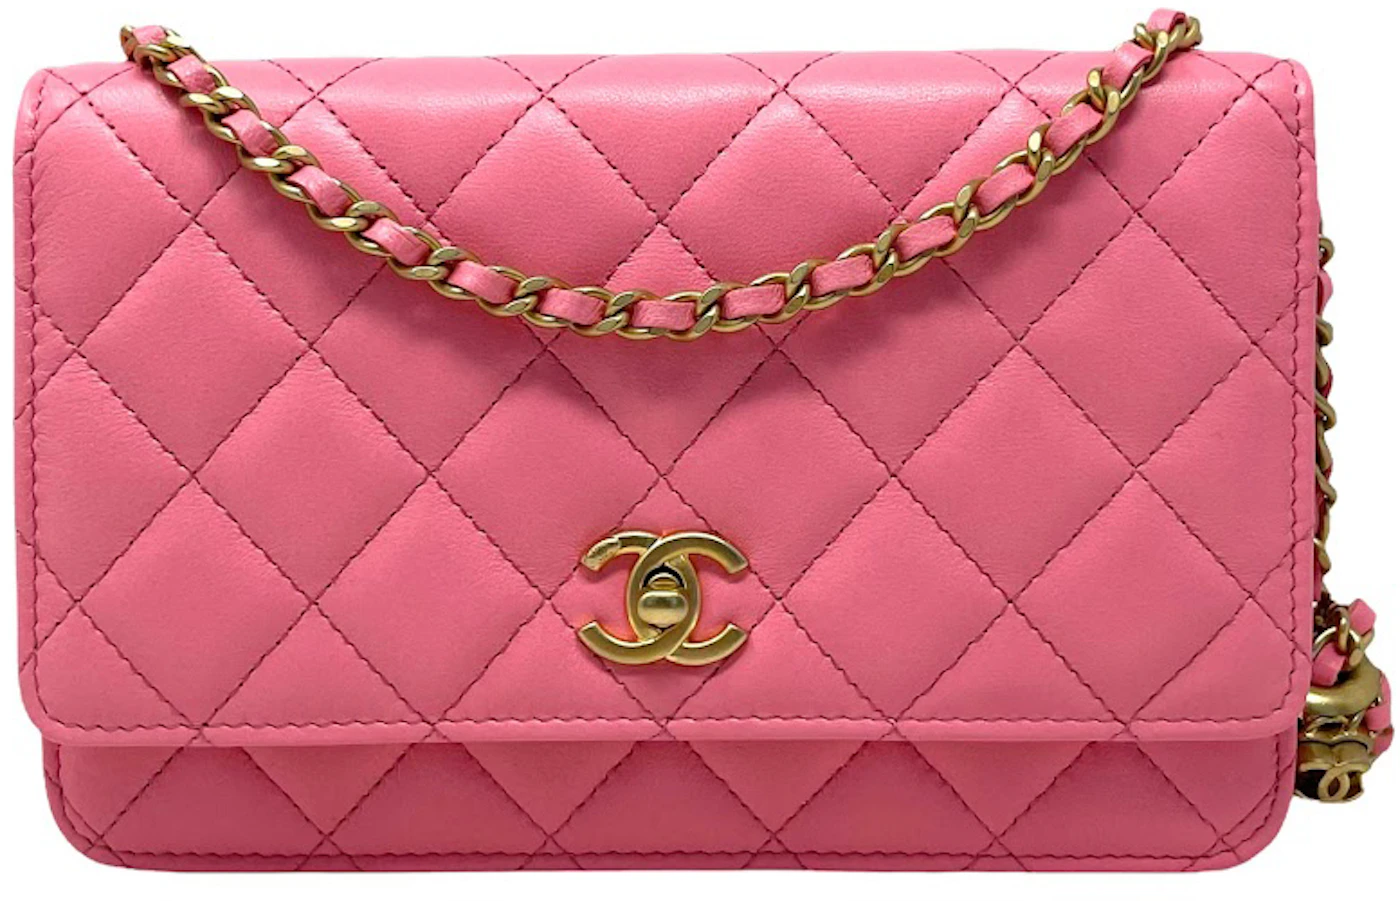 Timeless/classique leather crossbody bag Chanel Pink in Leather - 35976094